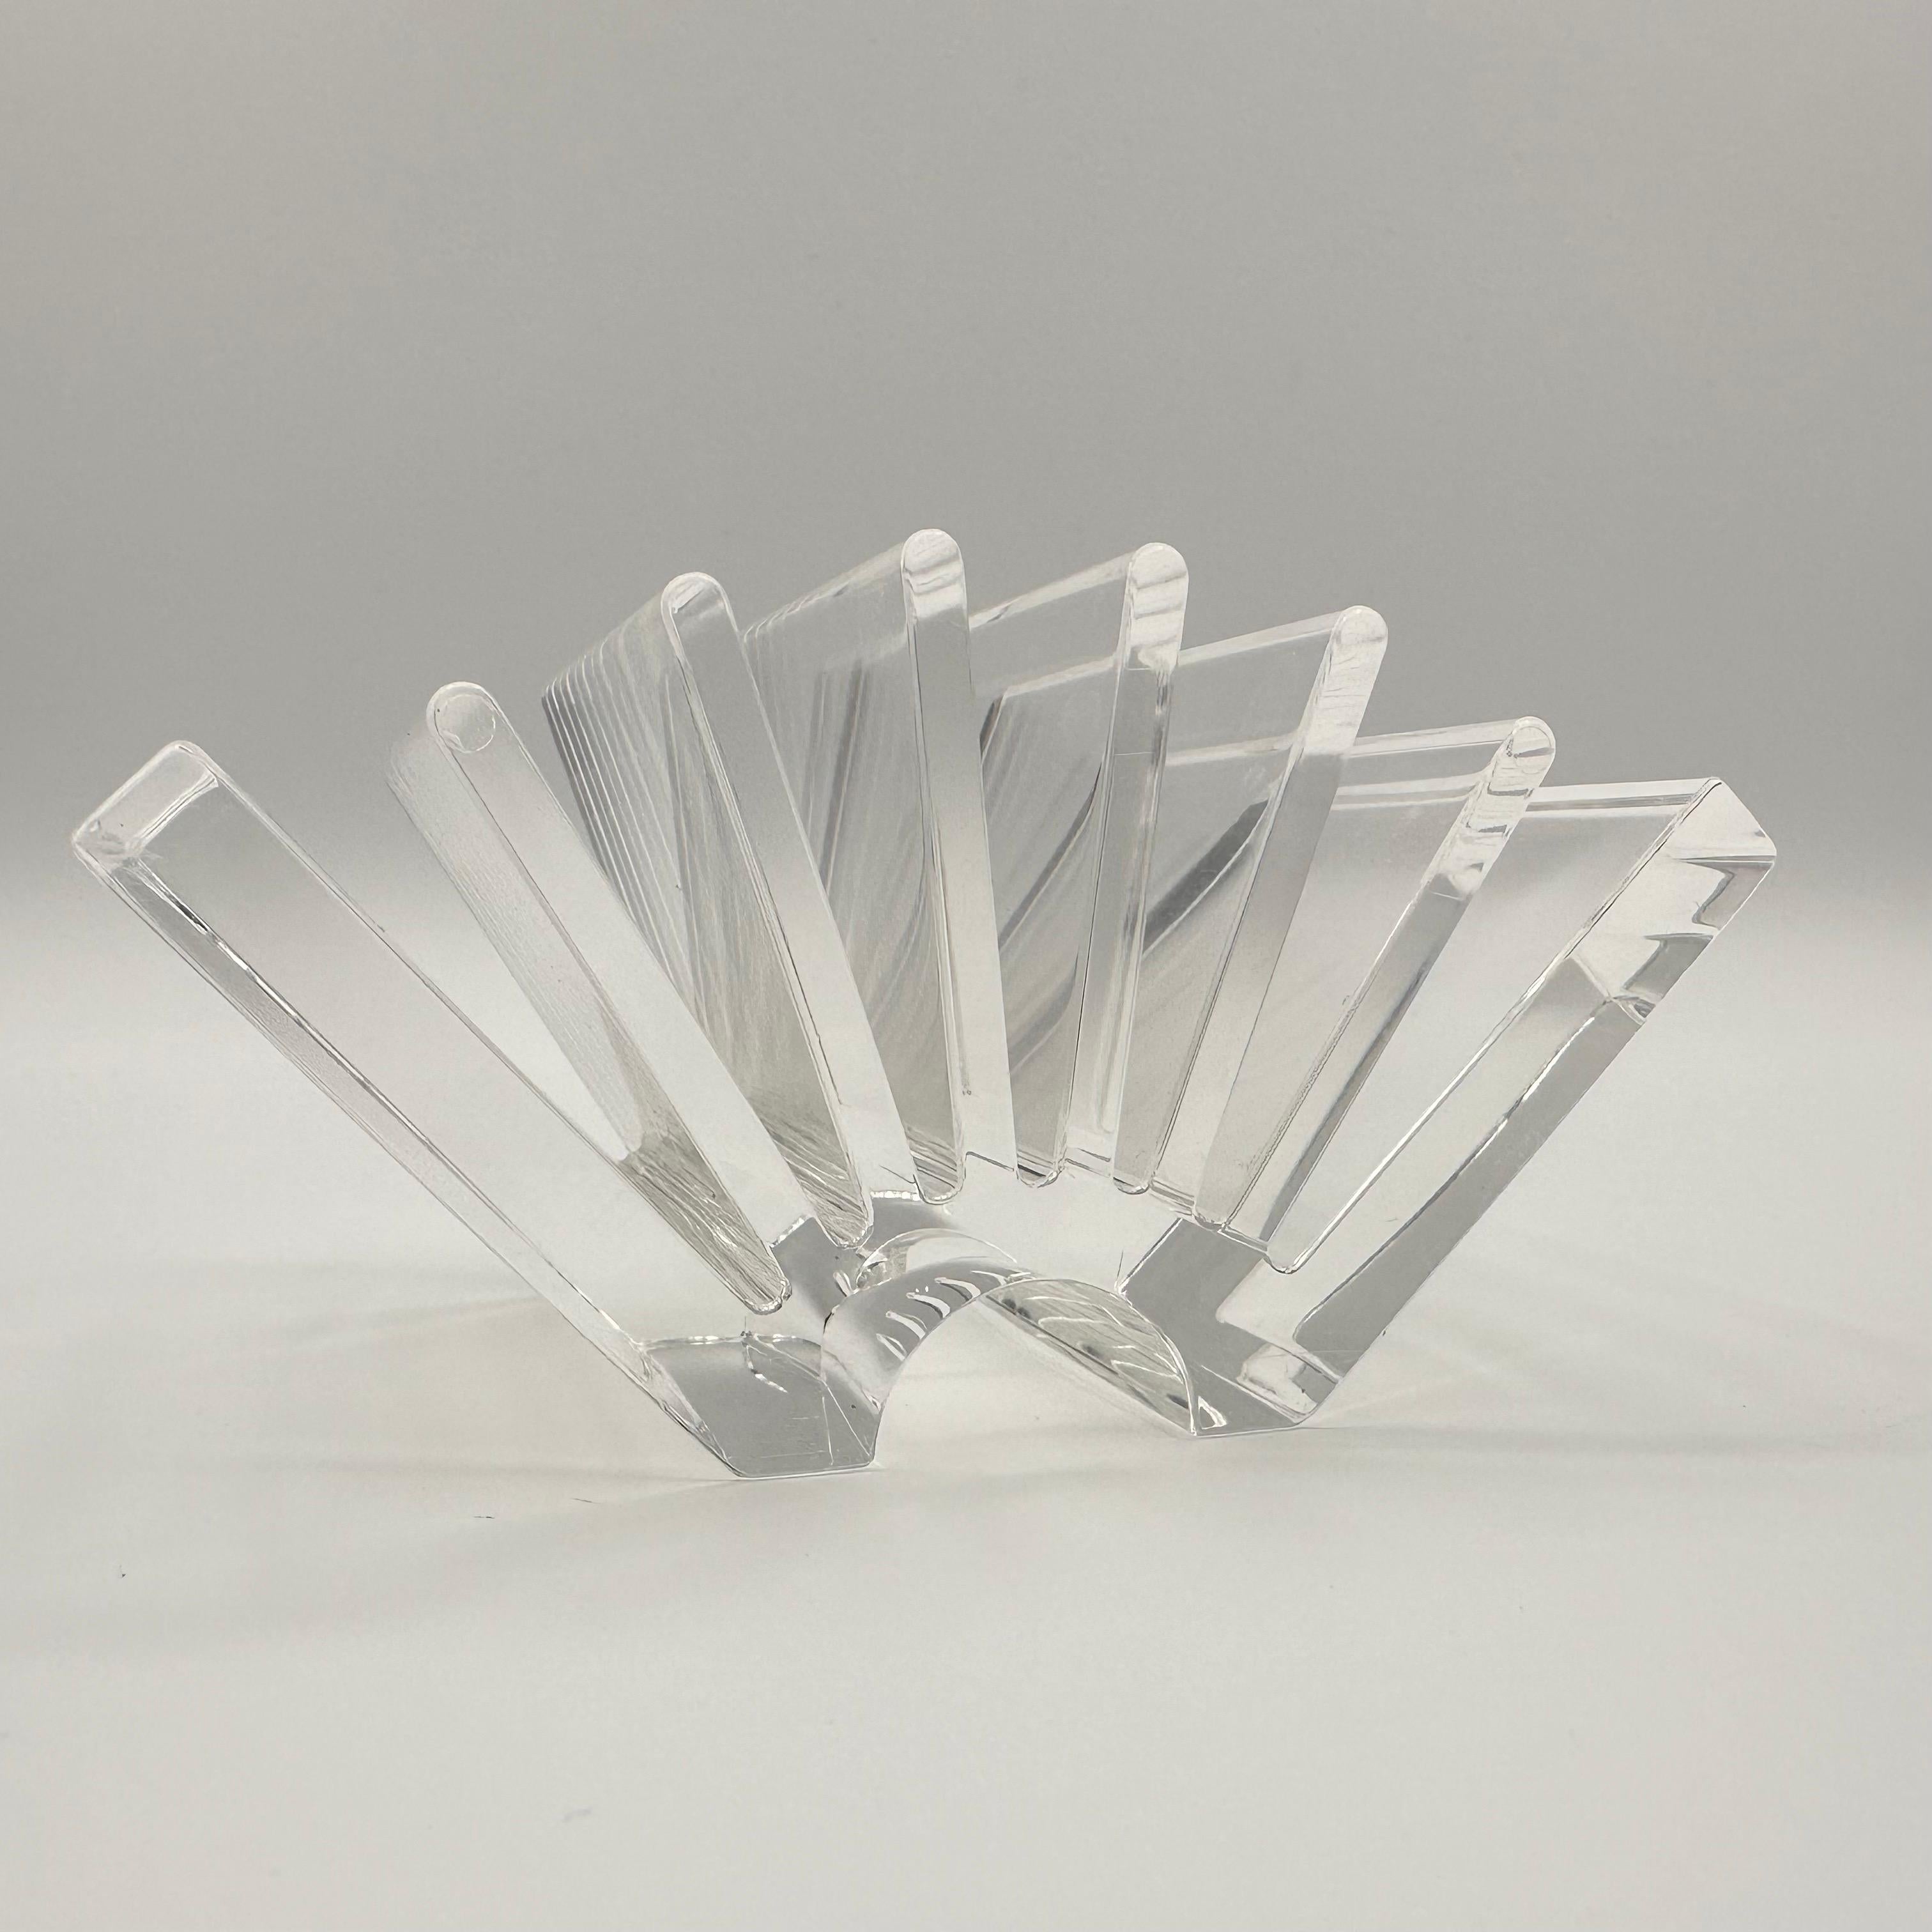 Vintage Clear Lucite Fan Shaped Card Holder by Guzzini 1980s Made in Italy For Sale 4